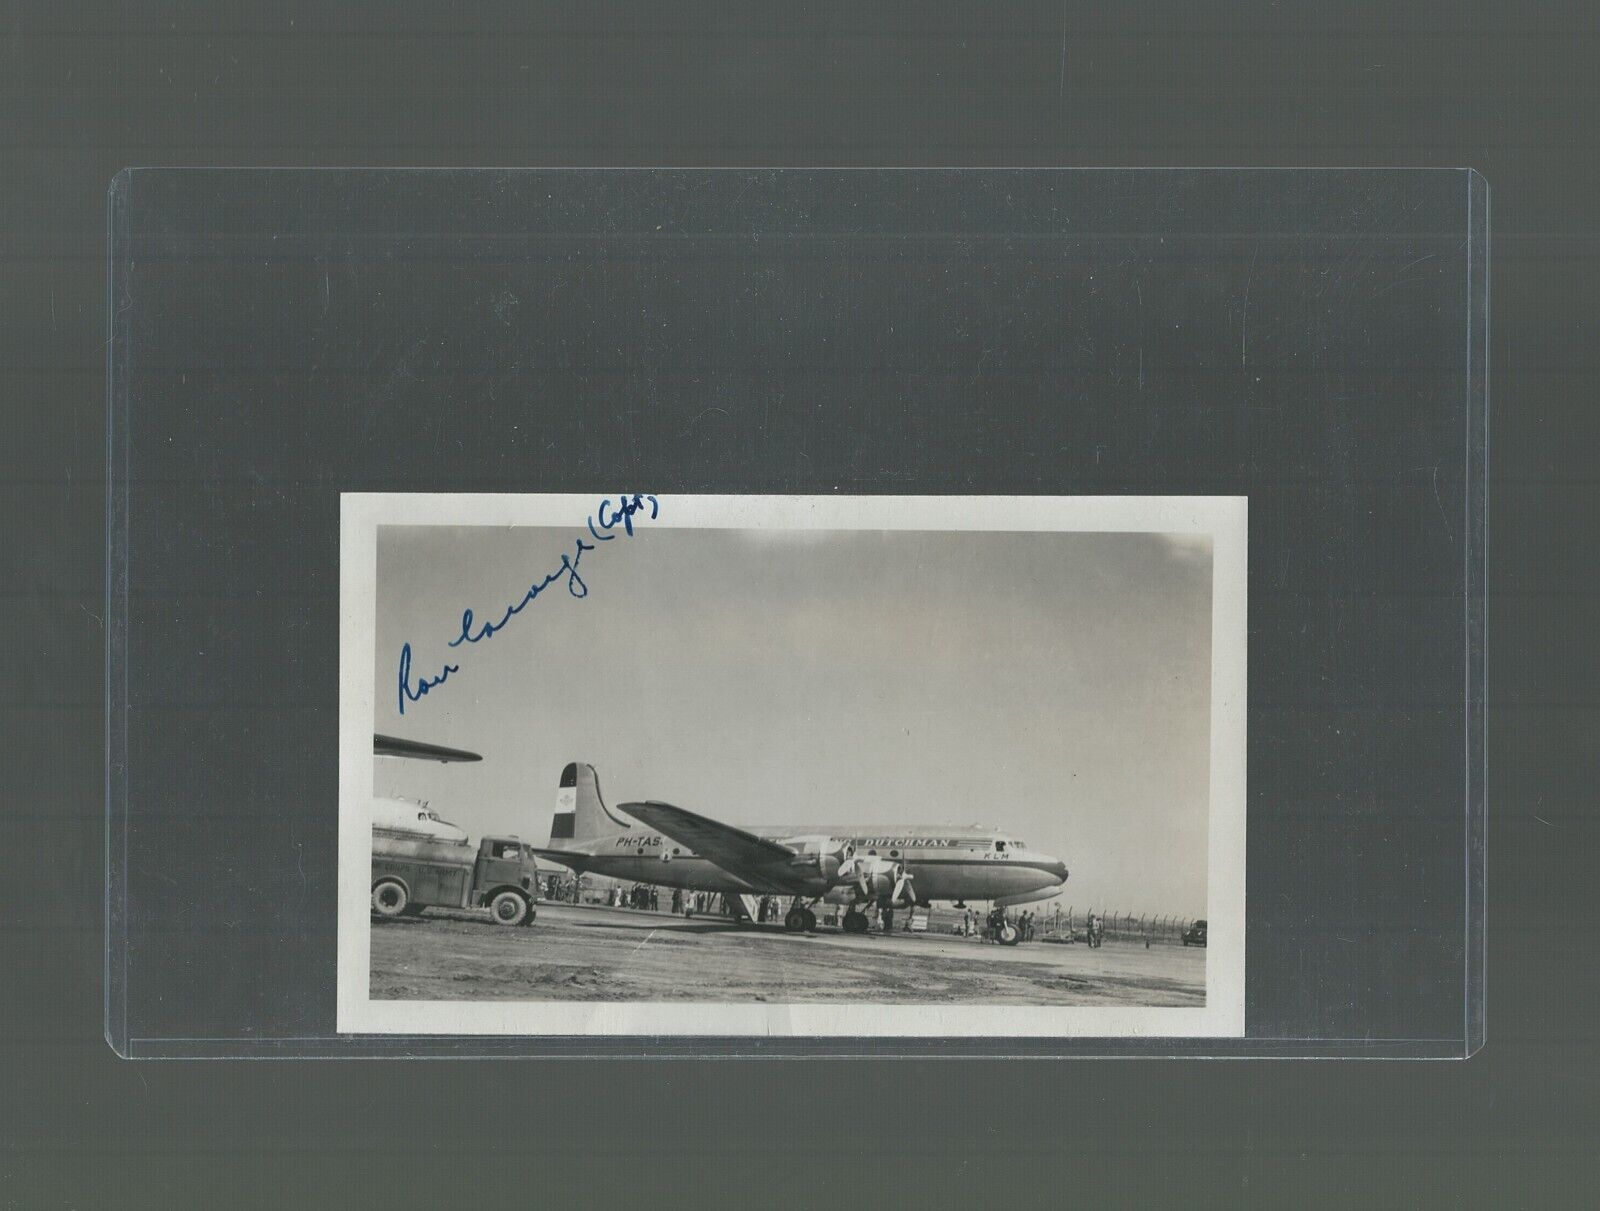 KLM Photo 1947 The Flying Dutchman Loading signed by Captain Ron George